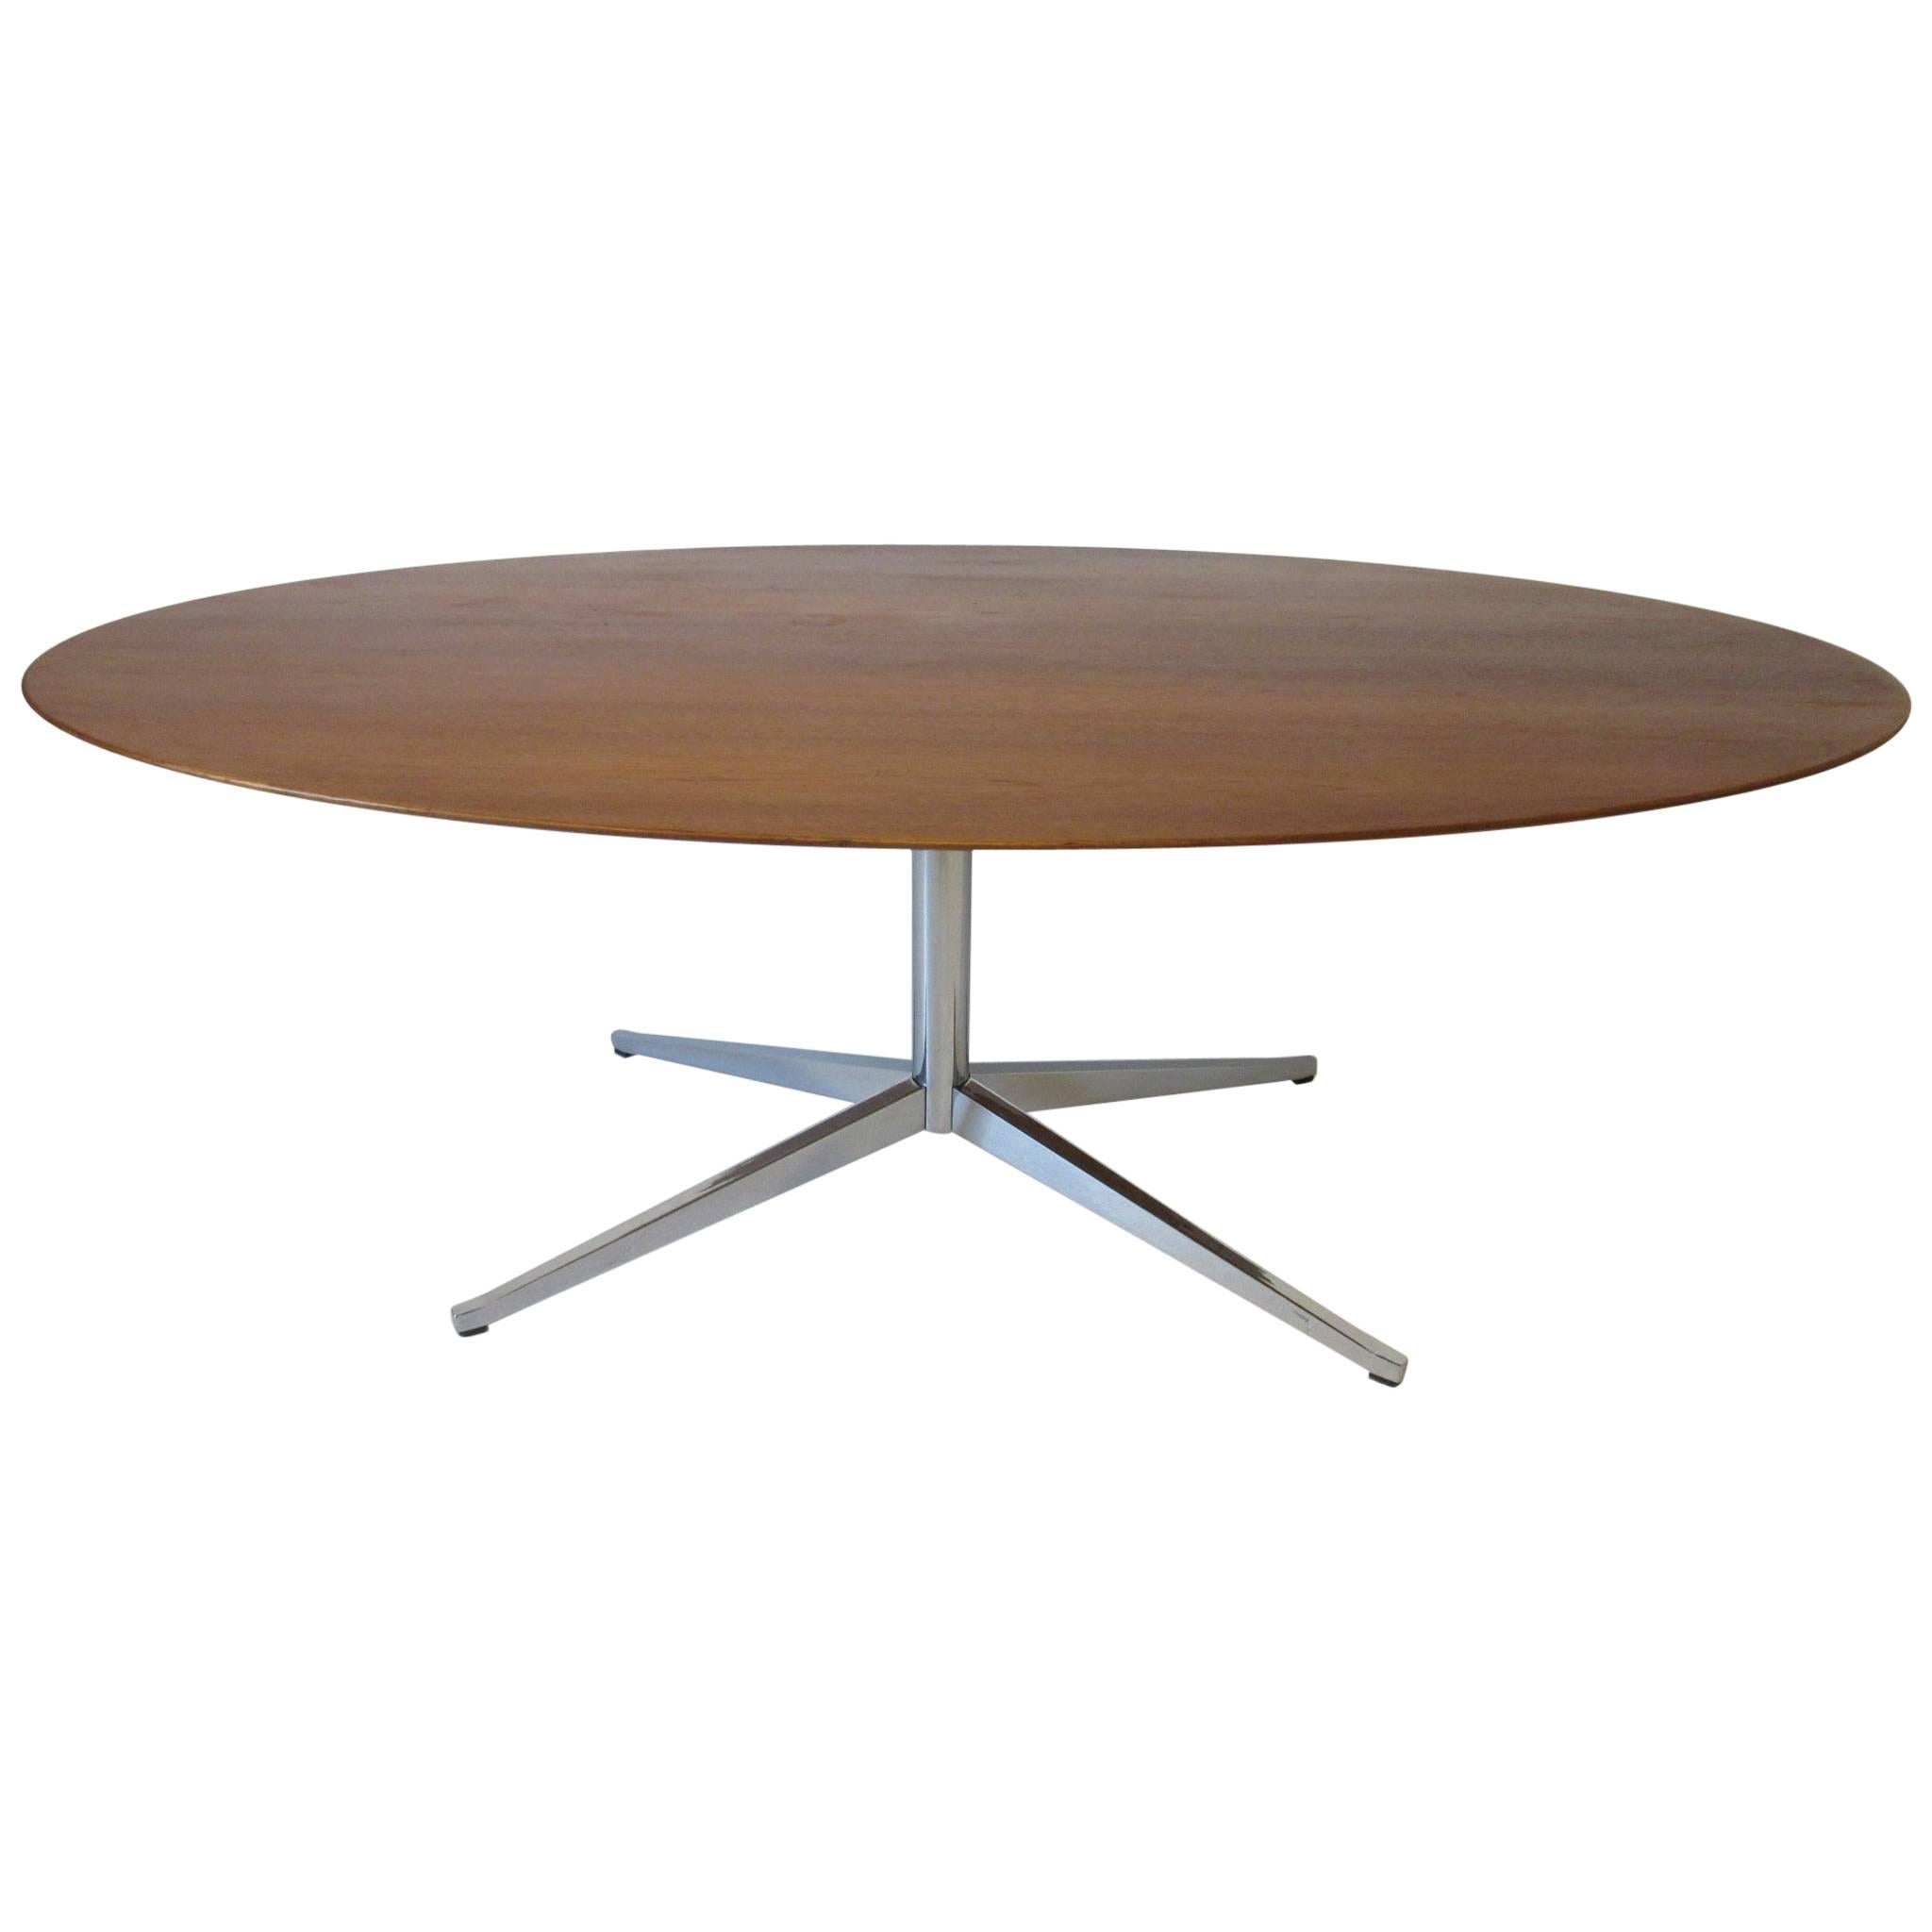 Florence Knoll X Based Walnut Oval Dining or Conference Table